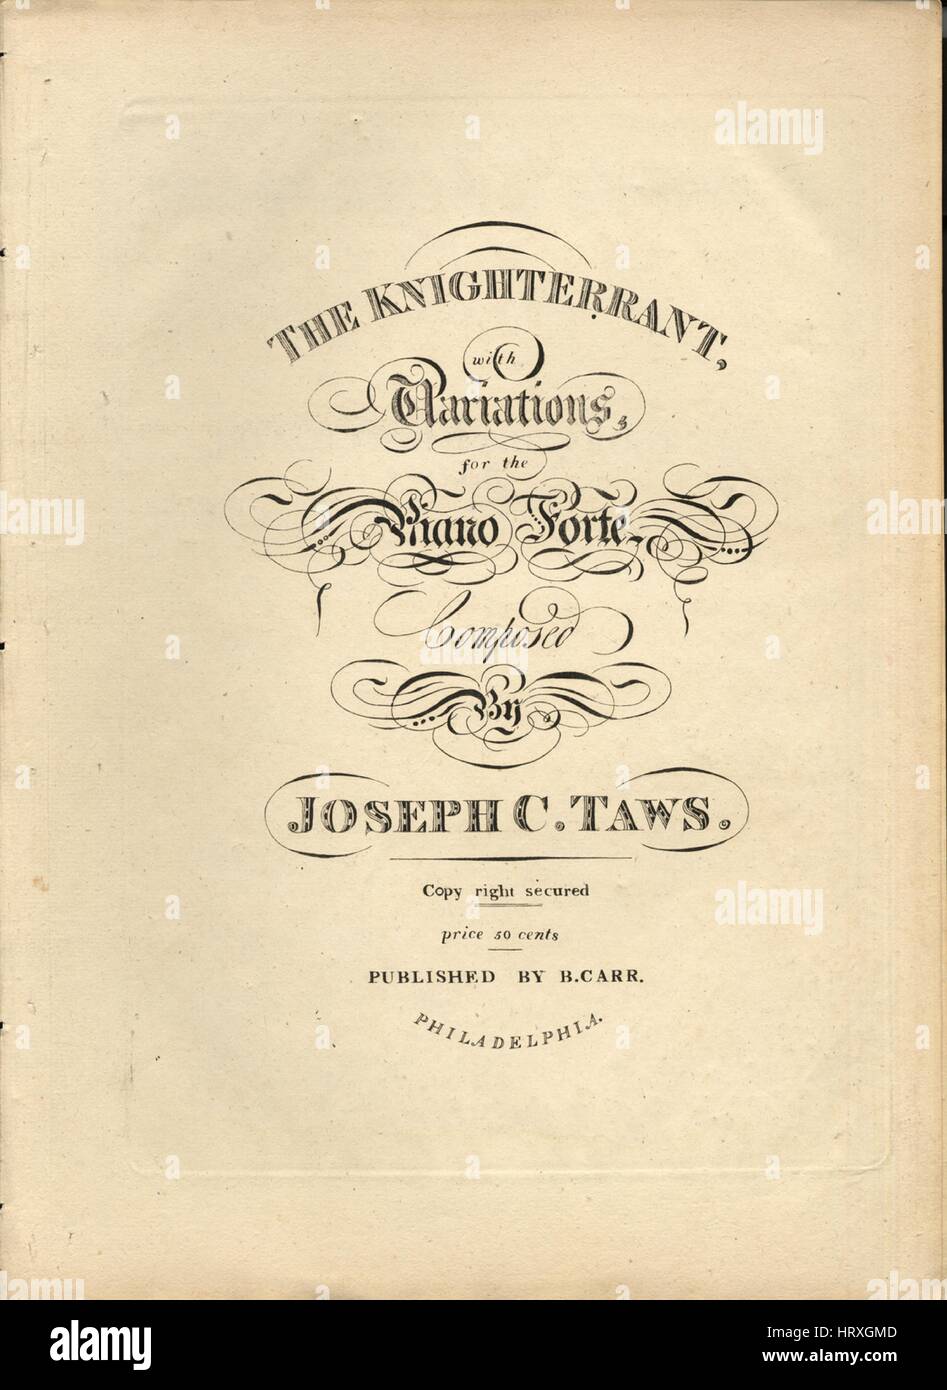 Sheet music cover image of the song 'The Knight Errant with Variations for the Piano Forte', with original authorship notes reading 'Composed by Joseph C Taws', United States, 1821. The publisher is listed as 'B. Carr', the form of composition is 'theme and variation', the instrumentation is 'piano', the first line reads 'None', and the illustration artist is listed as 'None'. Stock Photo